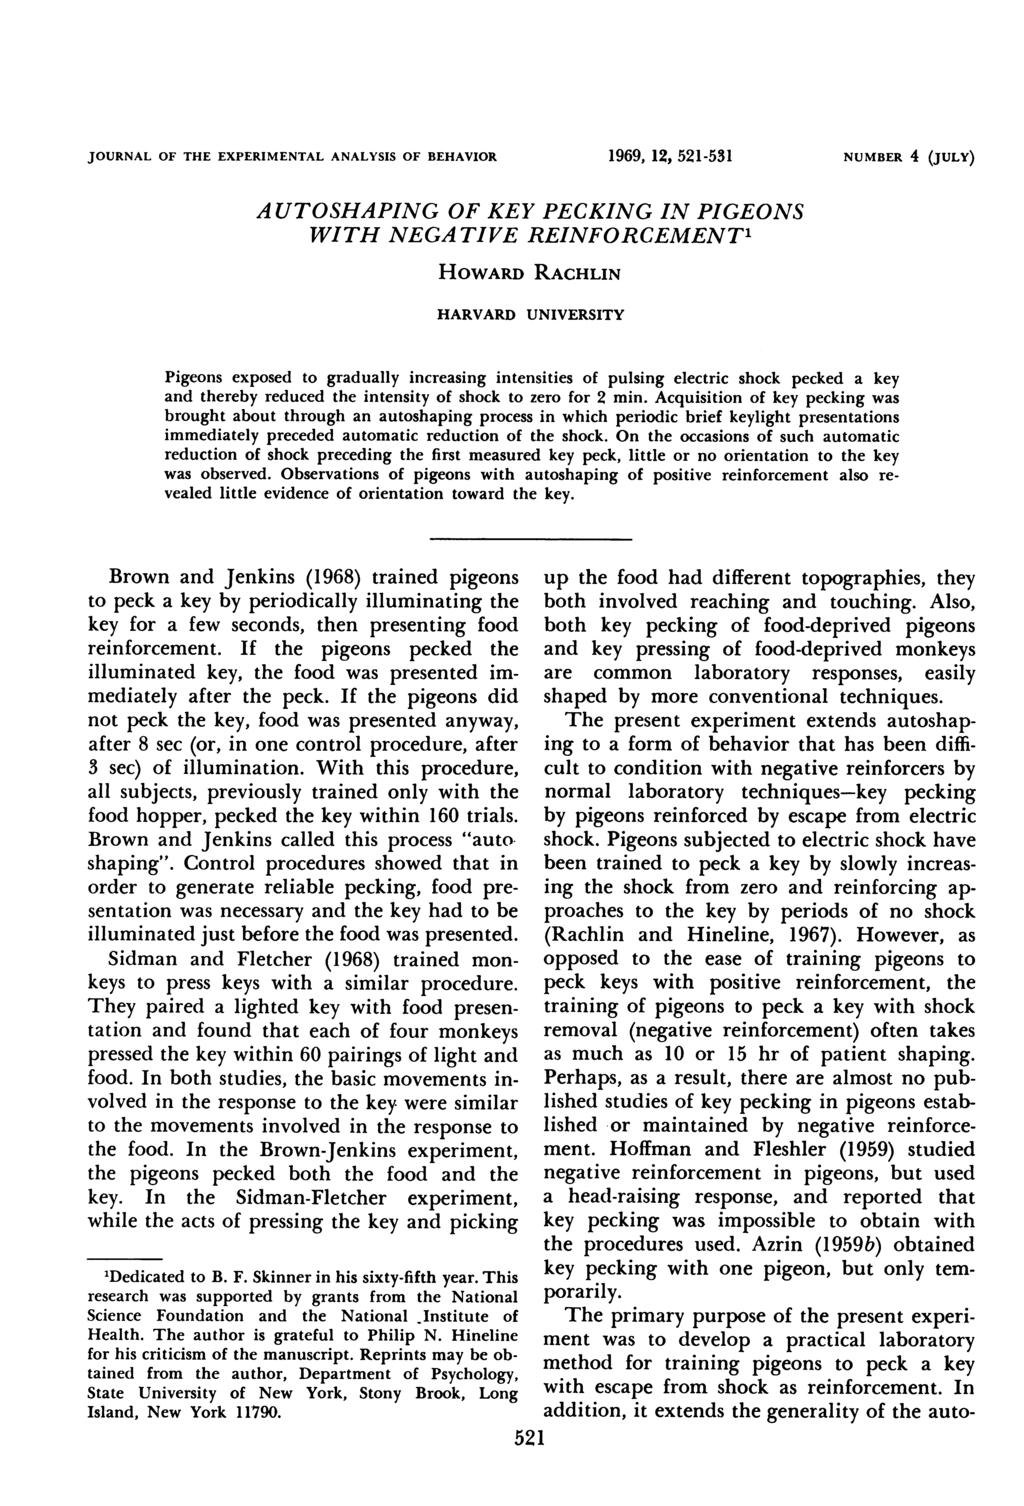 JOURNAL OF THE EXPERIMENTAL ANALYSIS OF BEHAVIOR 1969, 12, 521-531 NUMBER 4 (JULY) AUTOSHAPING OF KEY PECKING IN PIGEONS WITH NEGATIVE REINFORCEMENT' HOWARD RACHLIN HARVARD UNIVERSITY Pigeons exposed